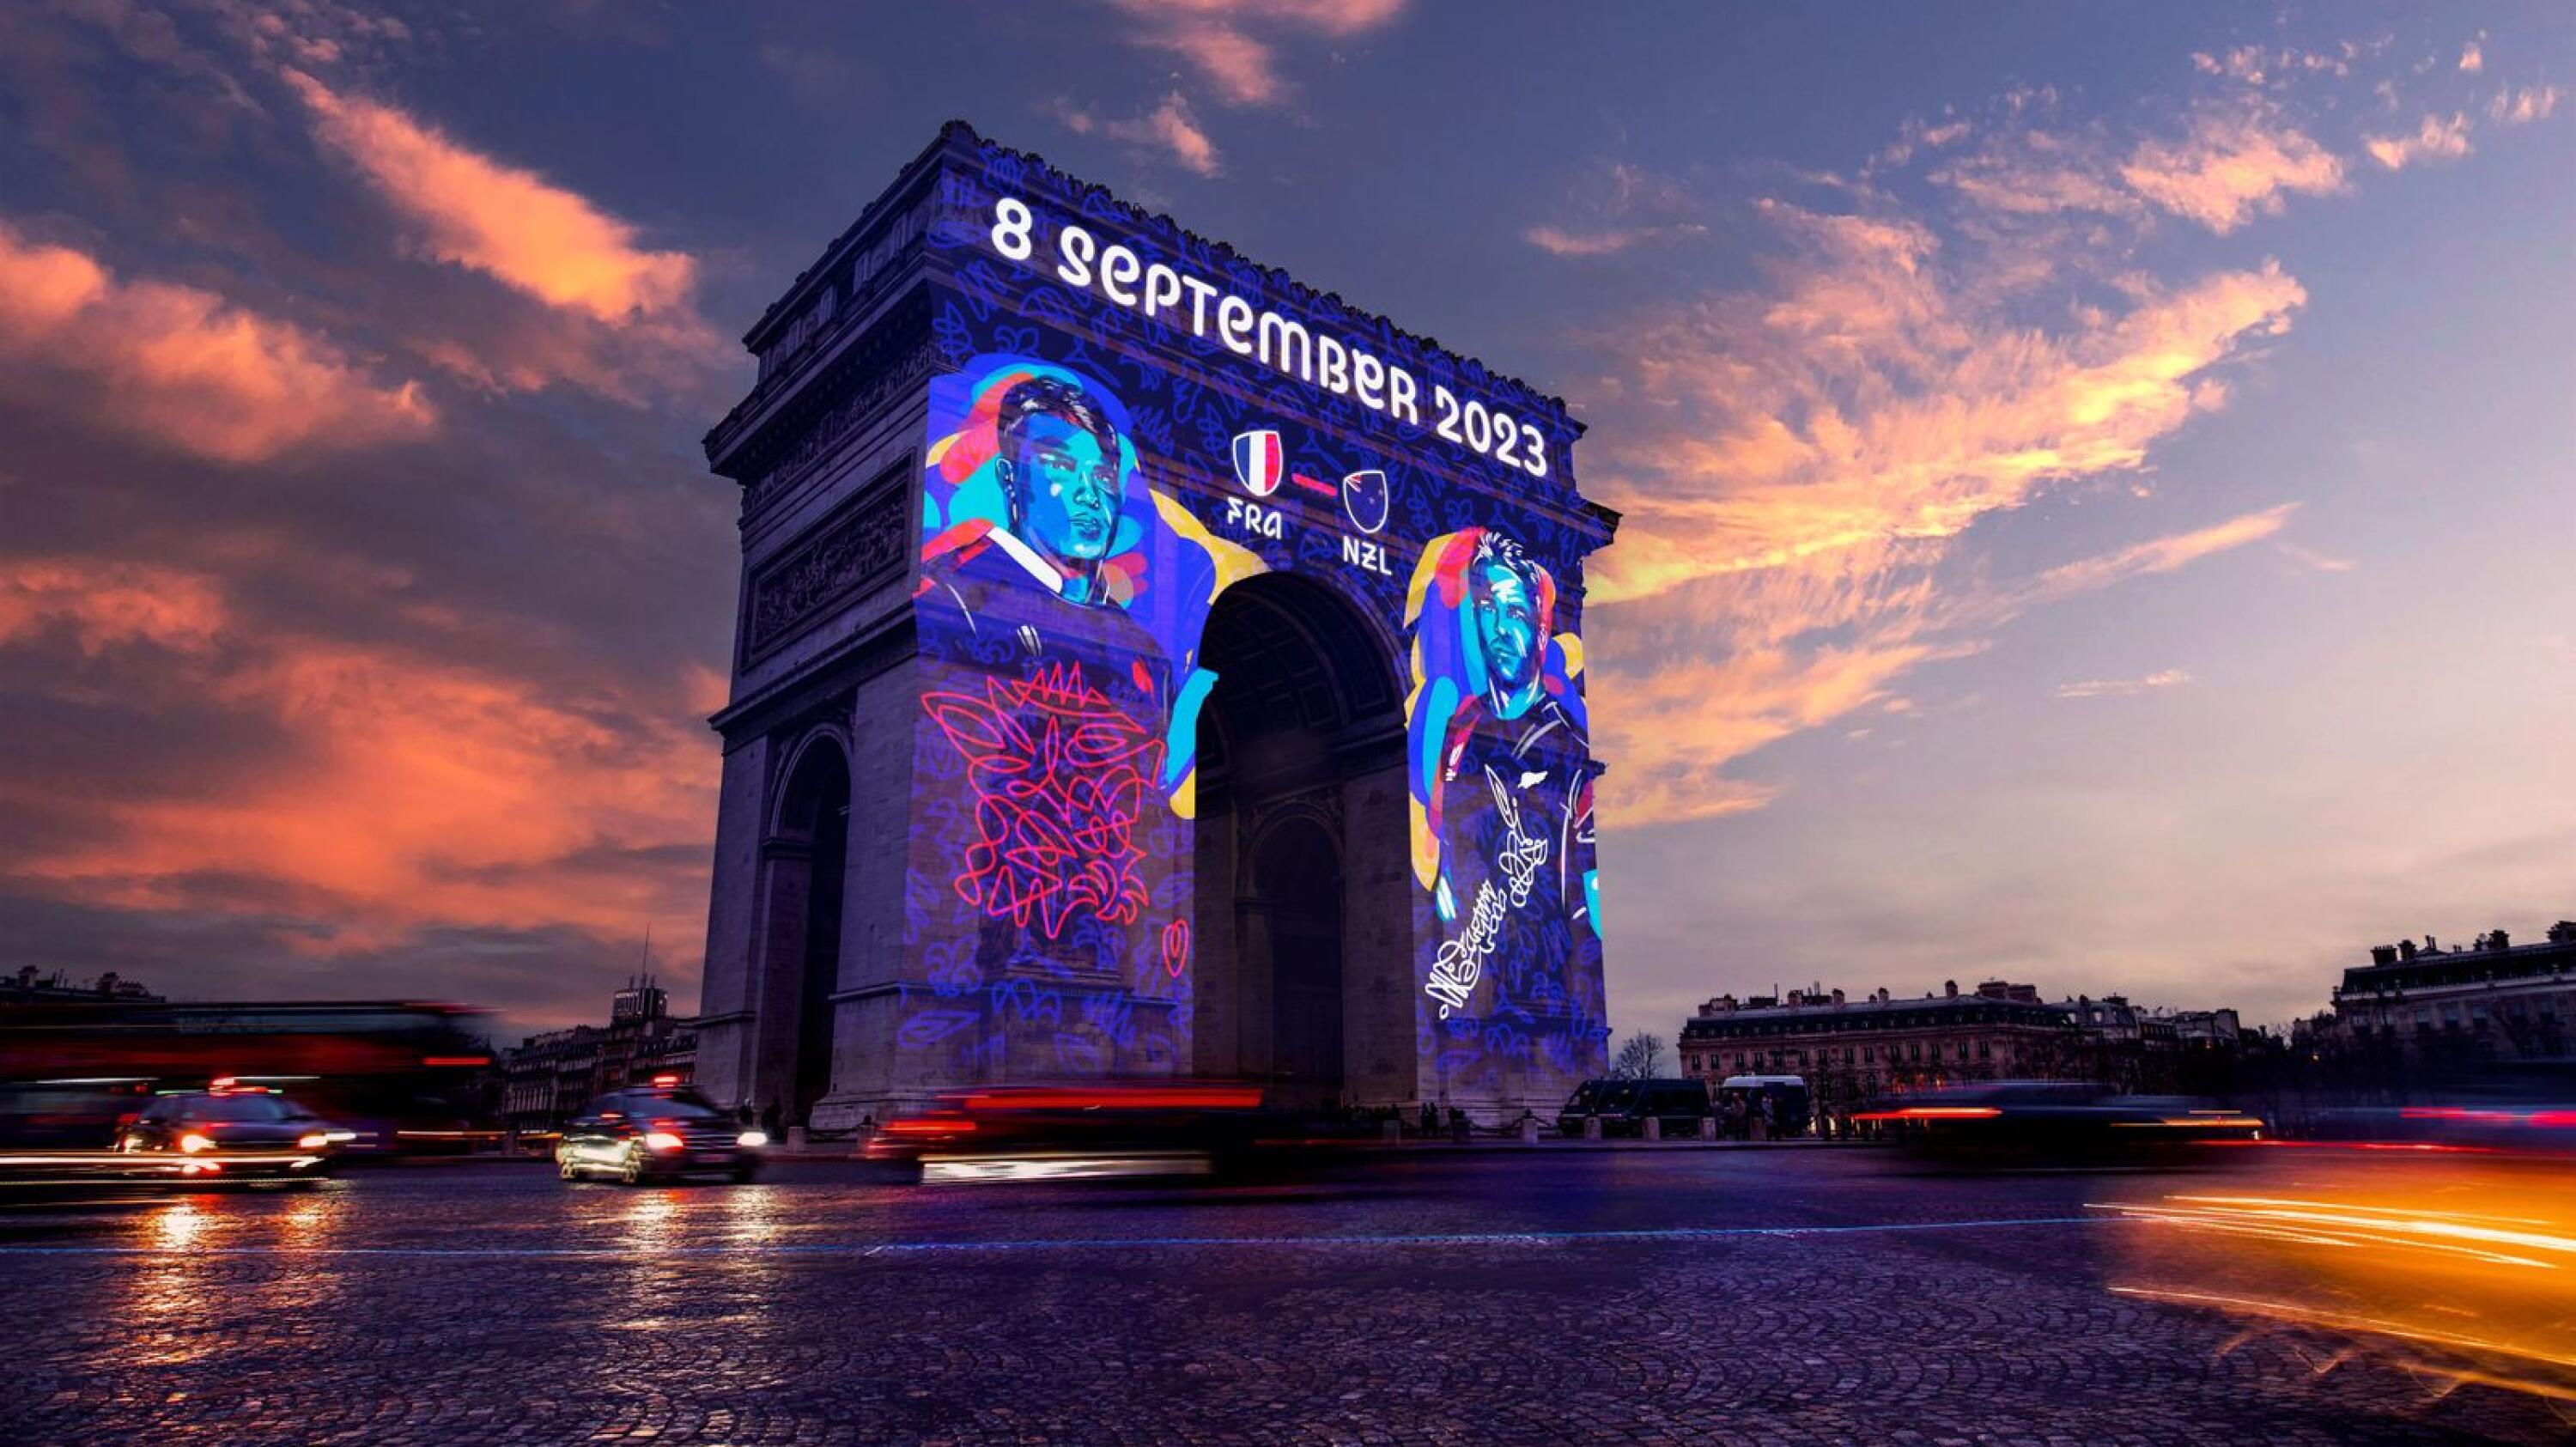 The Arc de Triomphe in Paris was lit up to mark the 100-day countdown to the 2023 Rugby World Cup